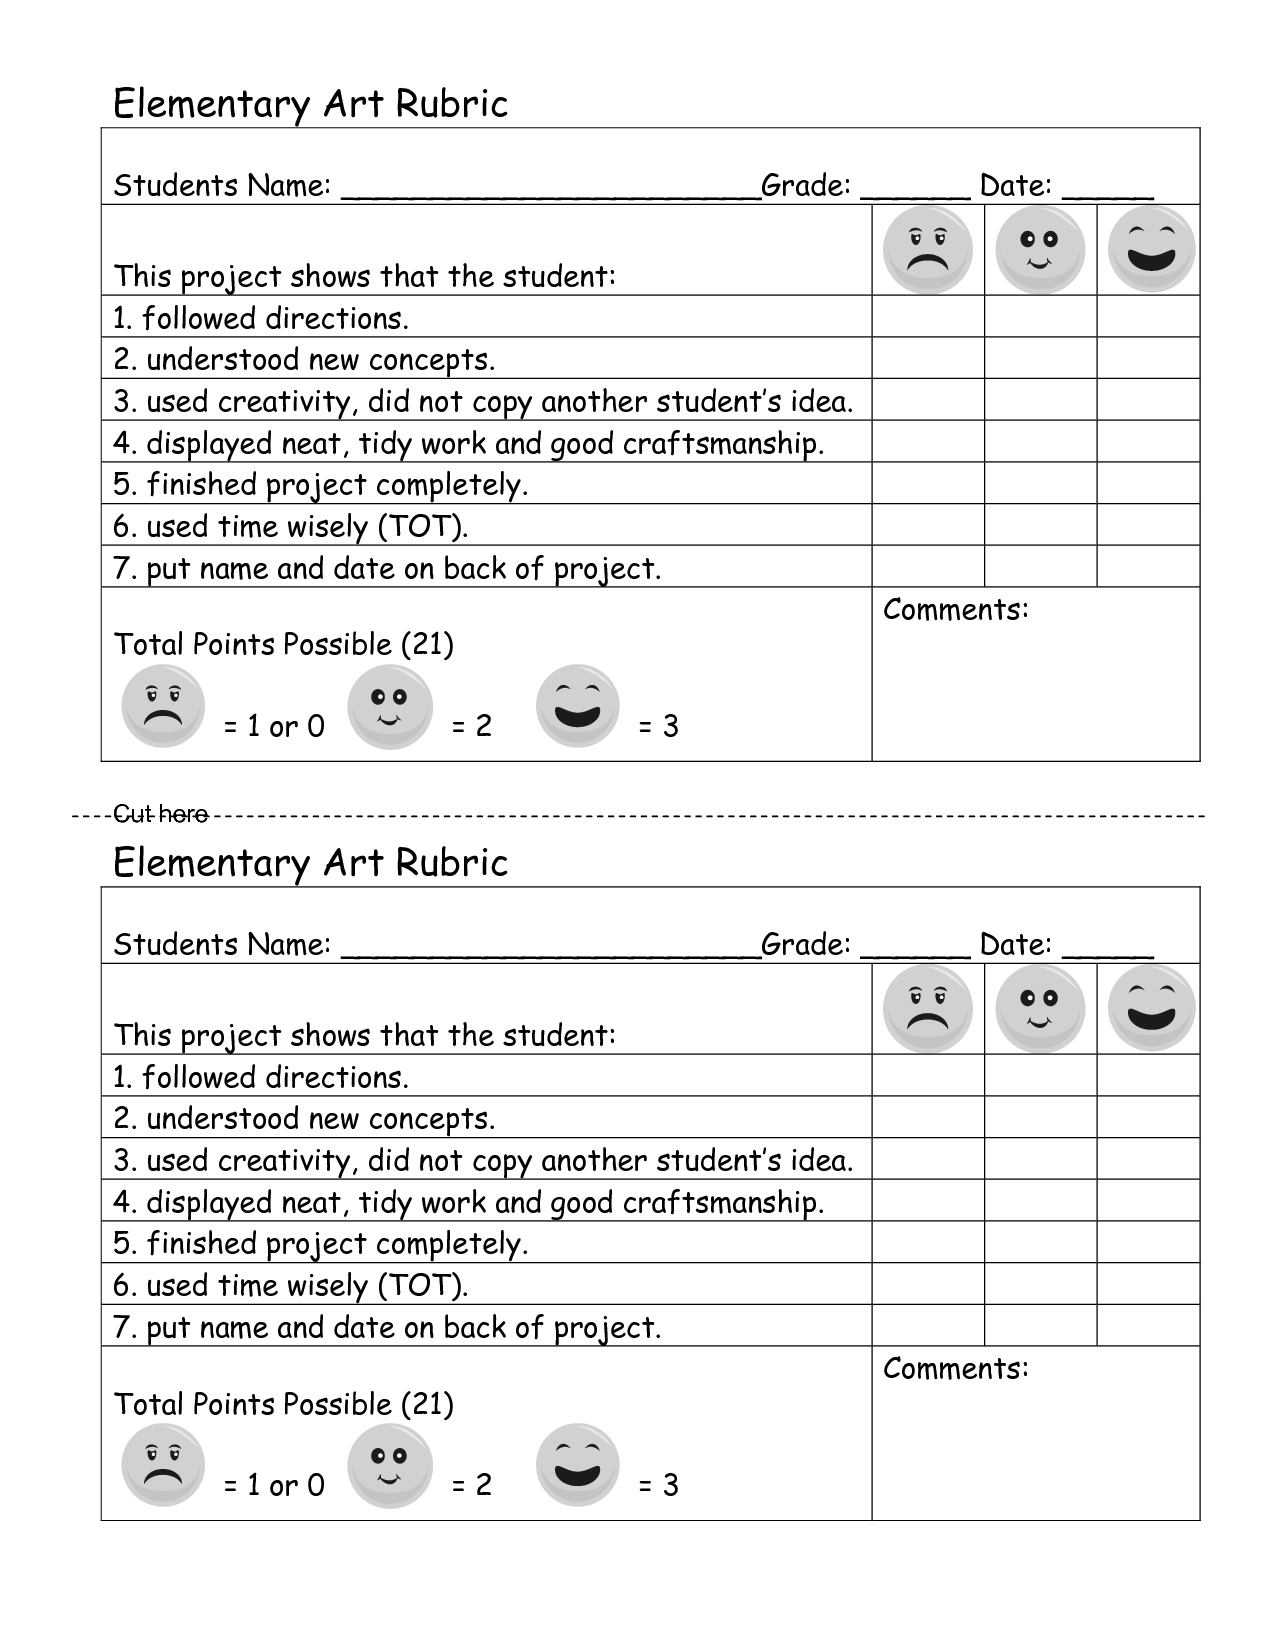 I Kind Of Like This One It&amp;#039;s Fitting For All Projects.it Gives The - Free Printable Art Rubrics